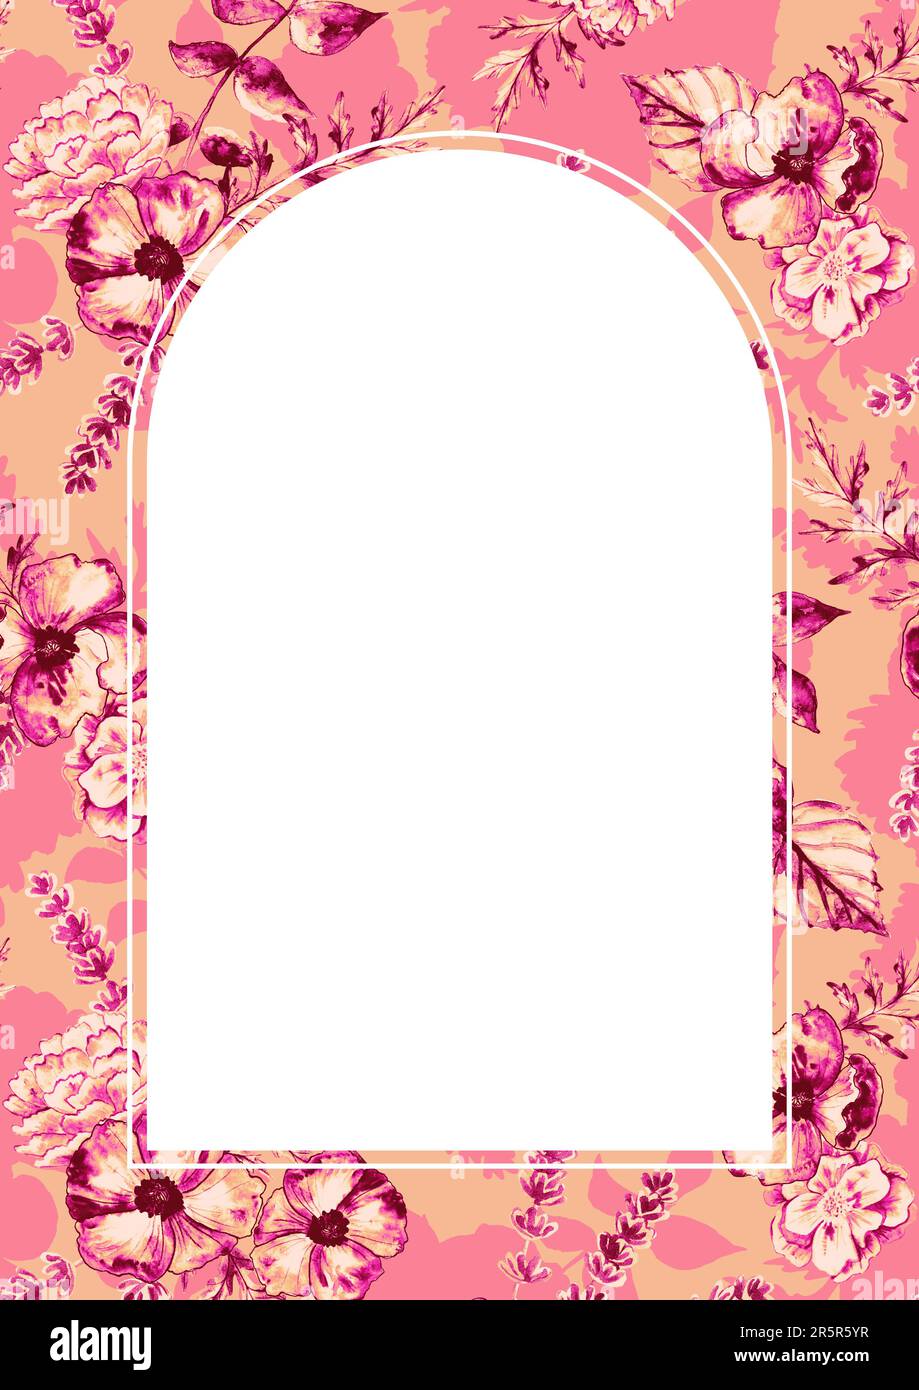 Rectangular A4 template for text with pink flowers. Frame or border with  floral motifs. Illustration for romantic pretty wedding invitation,  greeting Stock Photo - Alamy